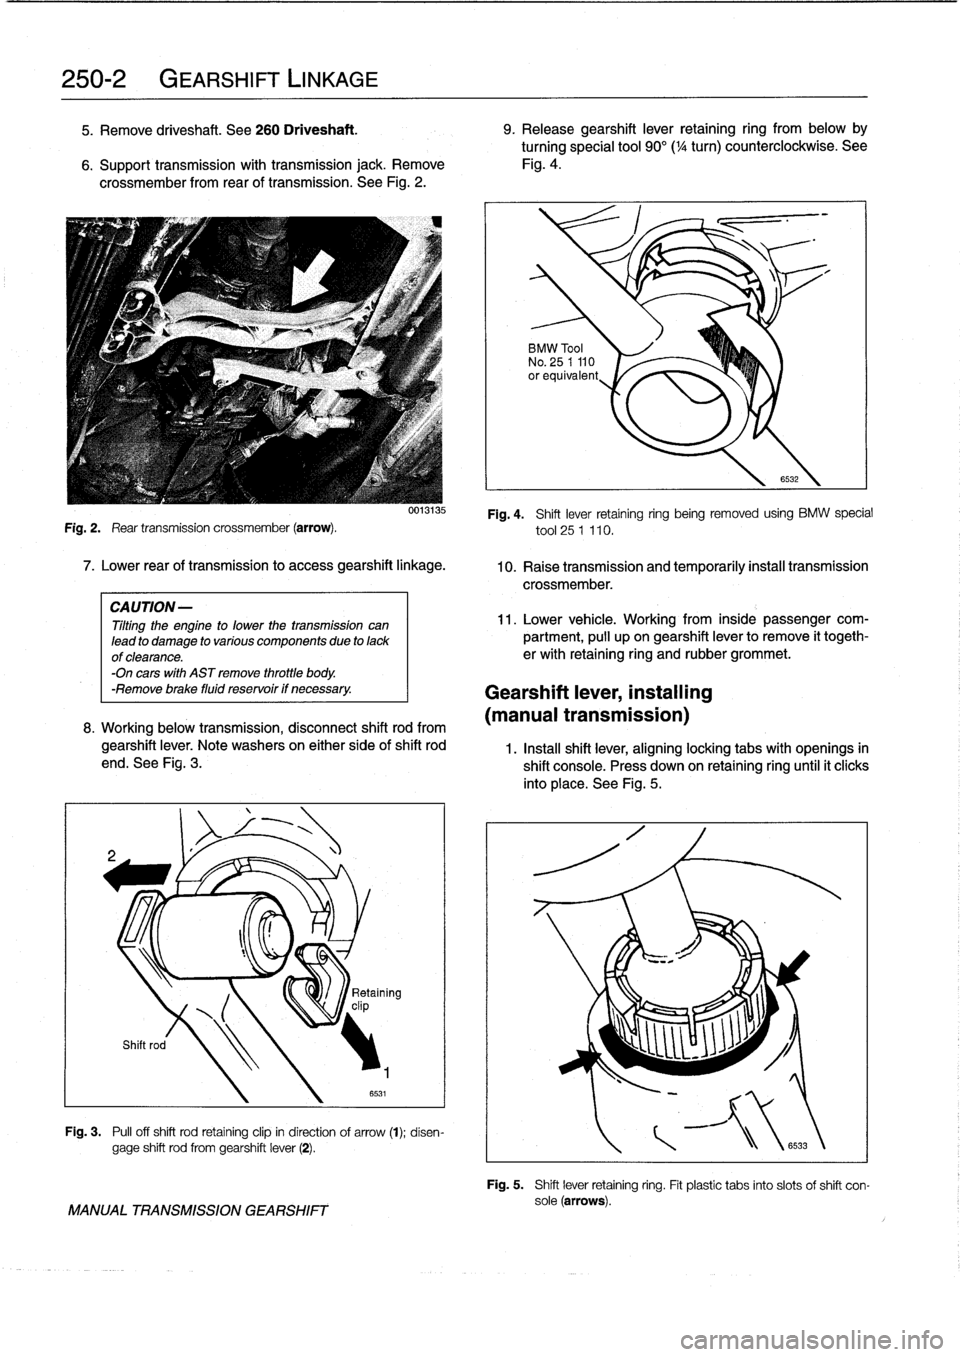 BMW 323i 1995 E36 Owners Manual 
250-2

	

GEARSHIFT
LINKAGE

5
.
Remove
driveshaft
.
See260
Driveshaft
.

	

9
.
Release
gearshift
lever
retaining
ring
from
below
by

turningspecial
tool
90°(
1
/4
turn)
counterclockwise
.
See

6
.